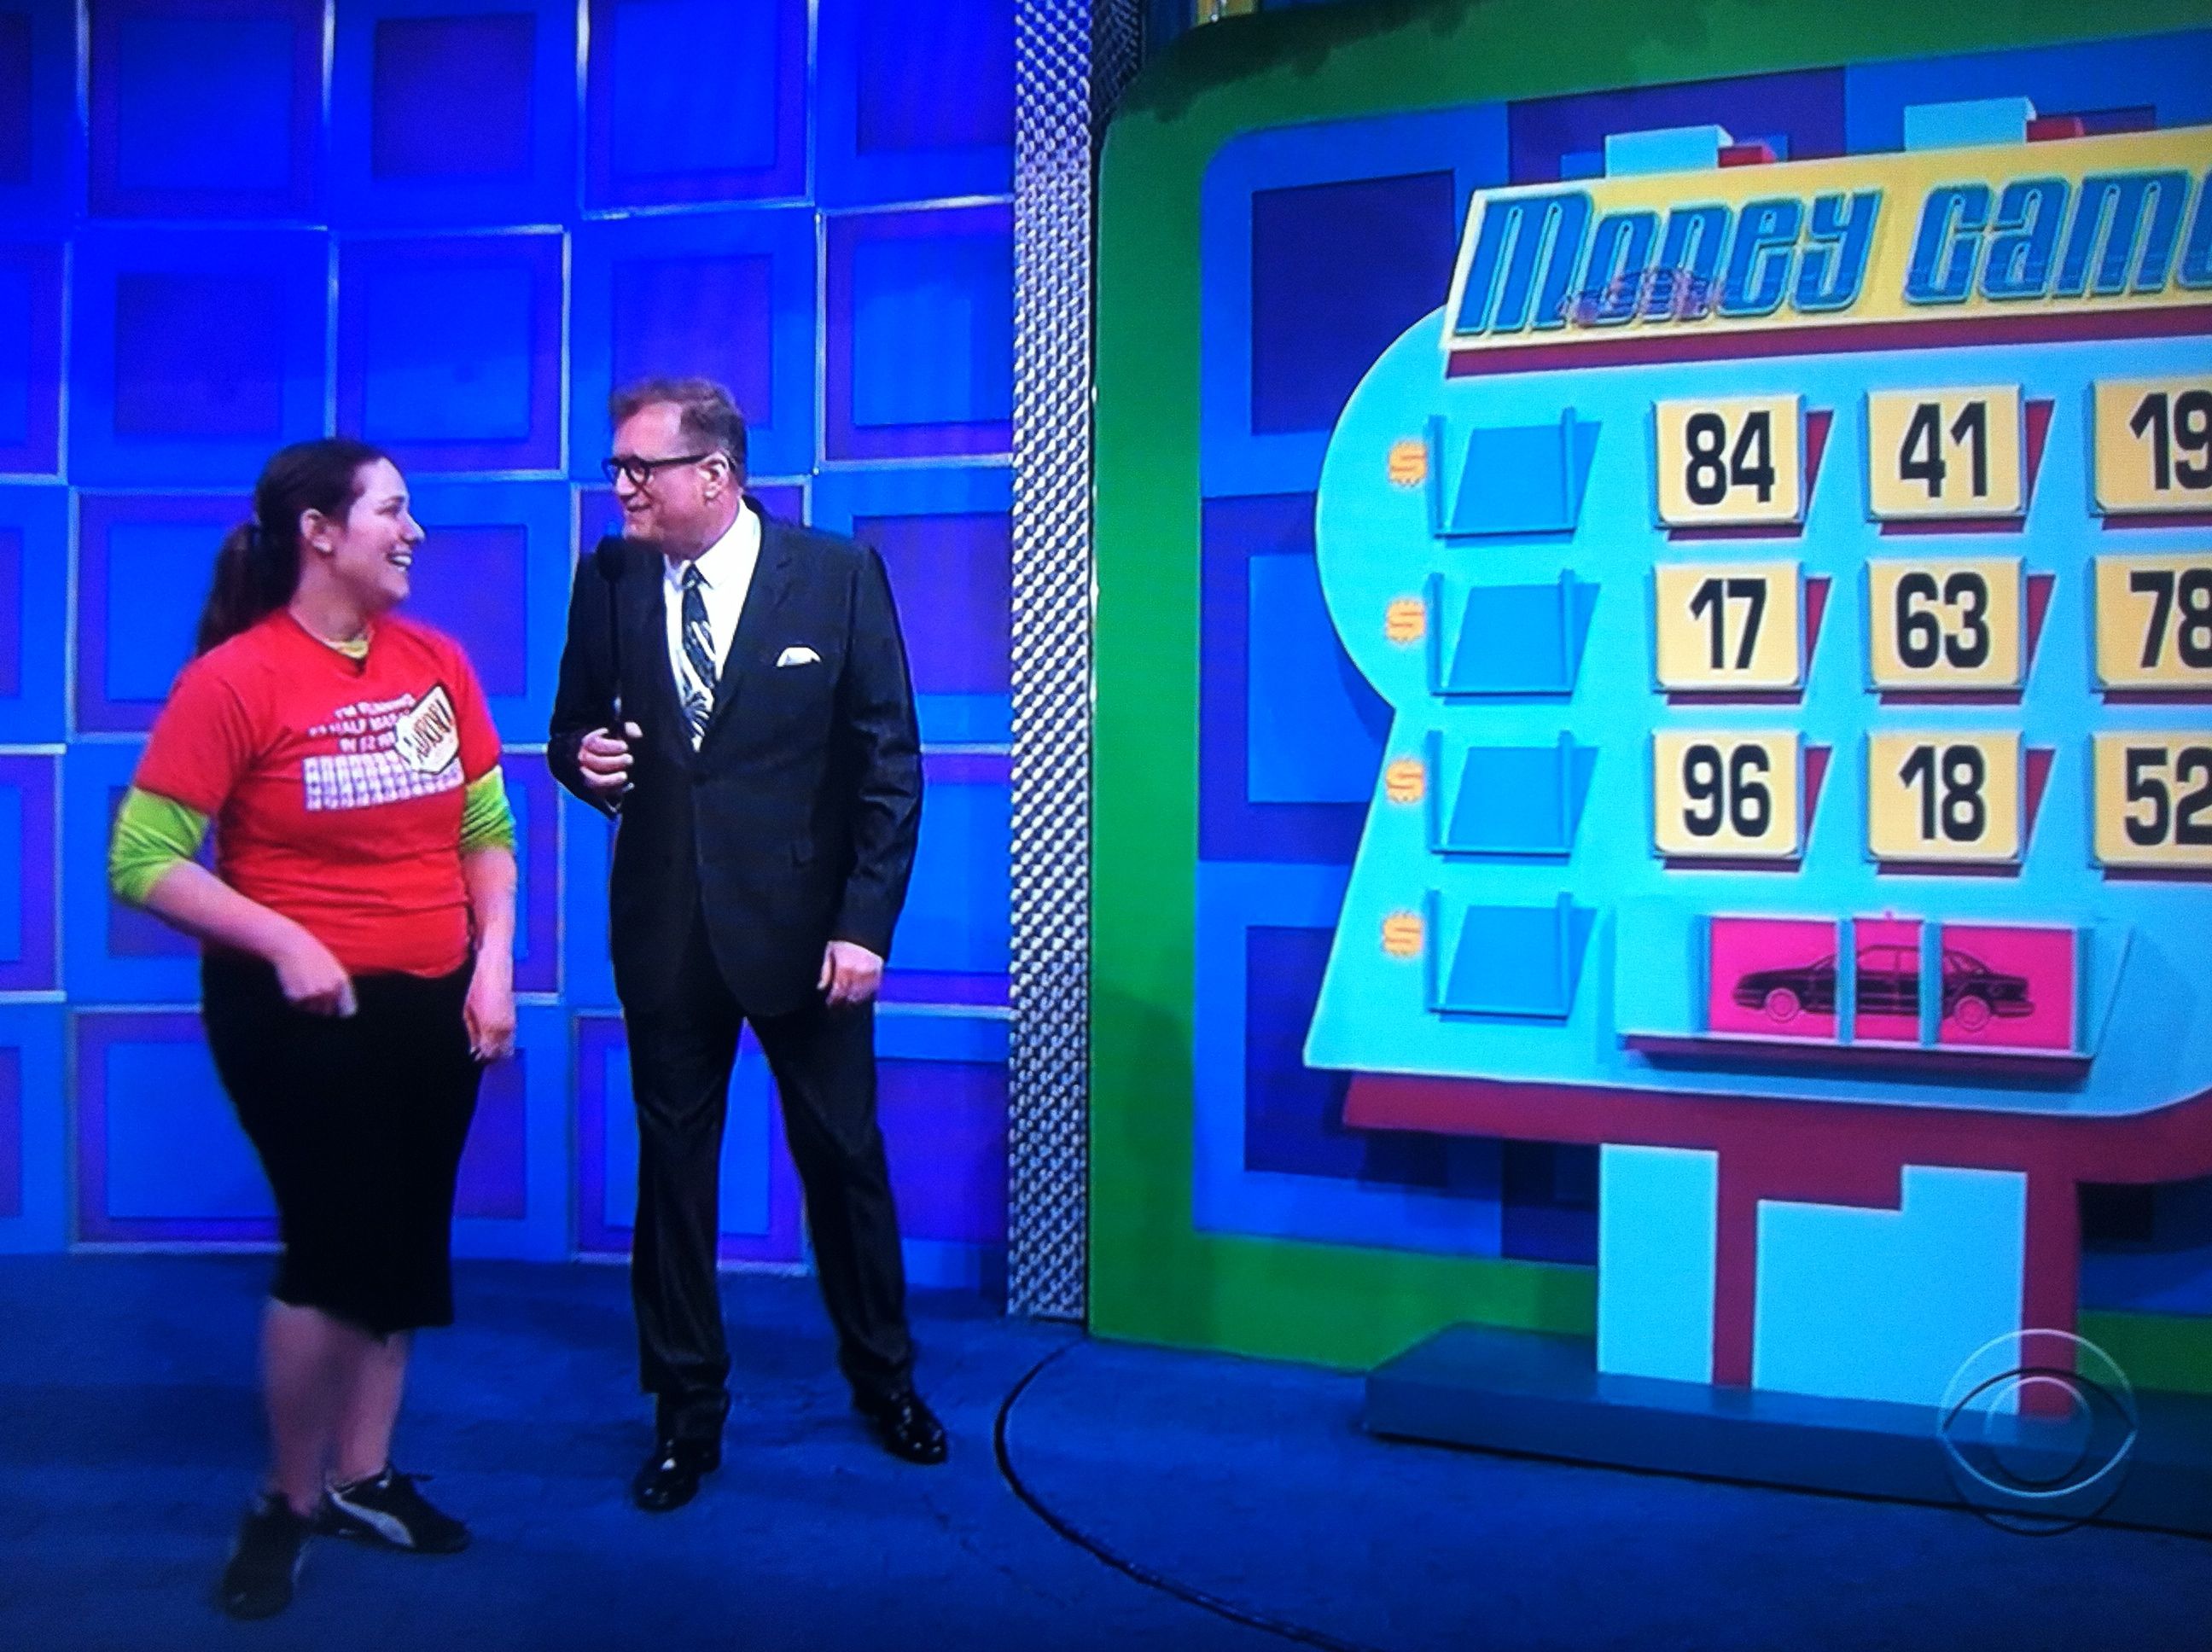 Aurora and Drew Carey at The Money Game on The Price is Right